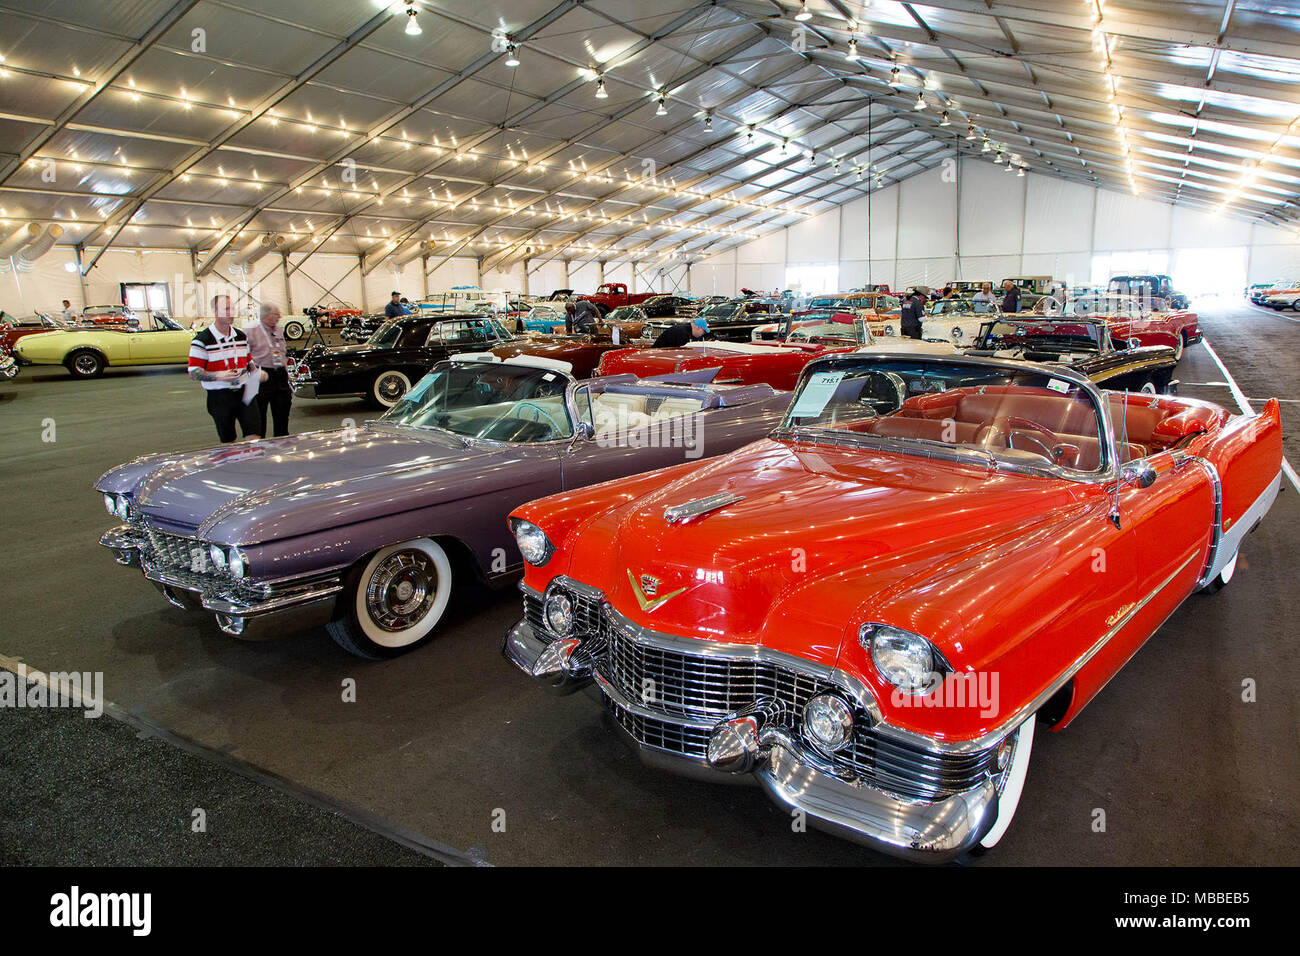 April 10, 2018 - West Palm Beach, Florida, U.S. - (l to r) A 1960 Cadillac Eldorado Biarritz convertible and 1954 Cadillac Eldorado convertible are part of the more than 140 cars John Staluppi is selling at the South Florida Fairgrounds in West Palm Beach, Florida on April 10, 2018. Staluppi is auctioning off more than 140 cars from his Cars of Dreams Collection housed in his museum in North Palm Beach. The Barrett-Jackson auto auction runs April 12-15 at the South Florida Fairgrounds. The auto auction will last four days this year due to the number of car's Staluppi is selling. (Credit Image: Stock Photo